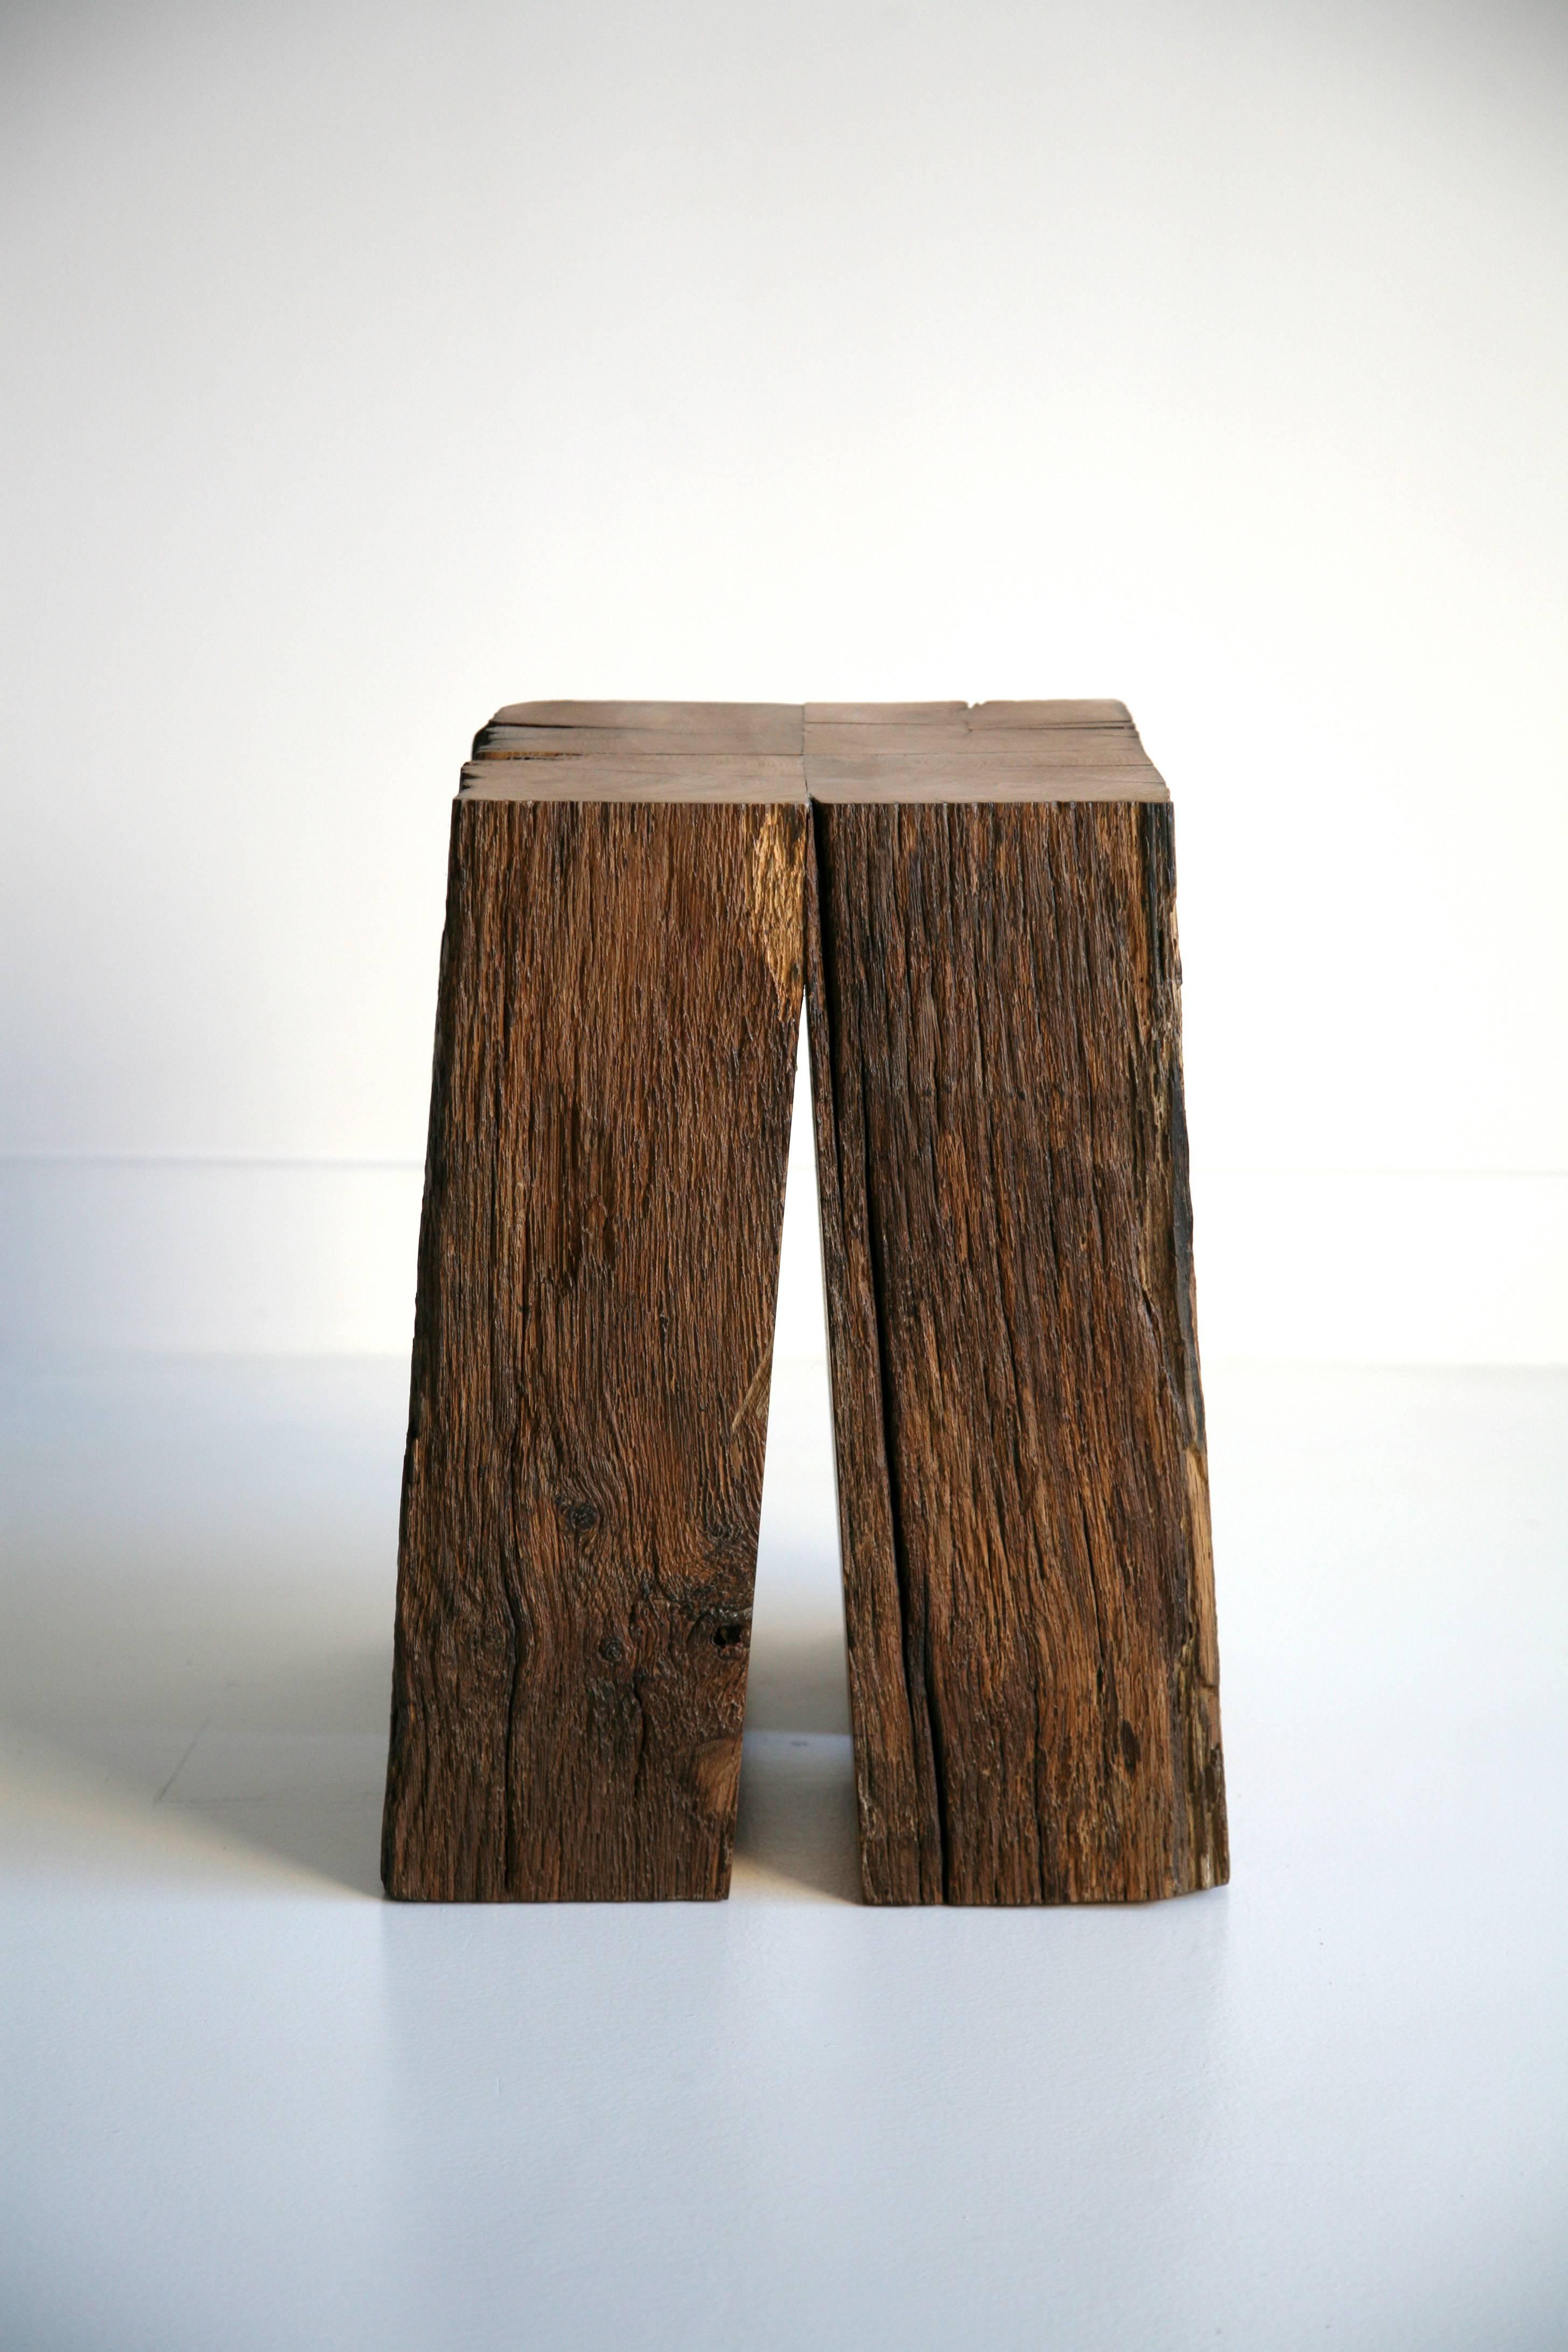 Organic Modern Ensemble of Ancient Normandy Oak New Designed Stool Tables by Timothée Musset For Sale